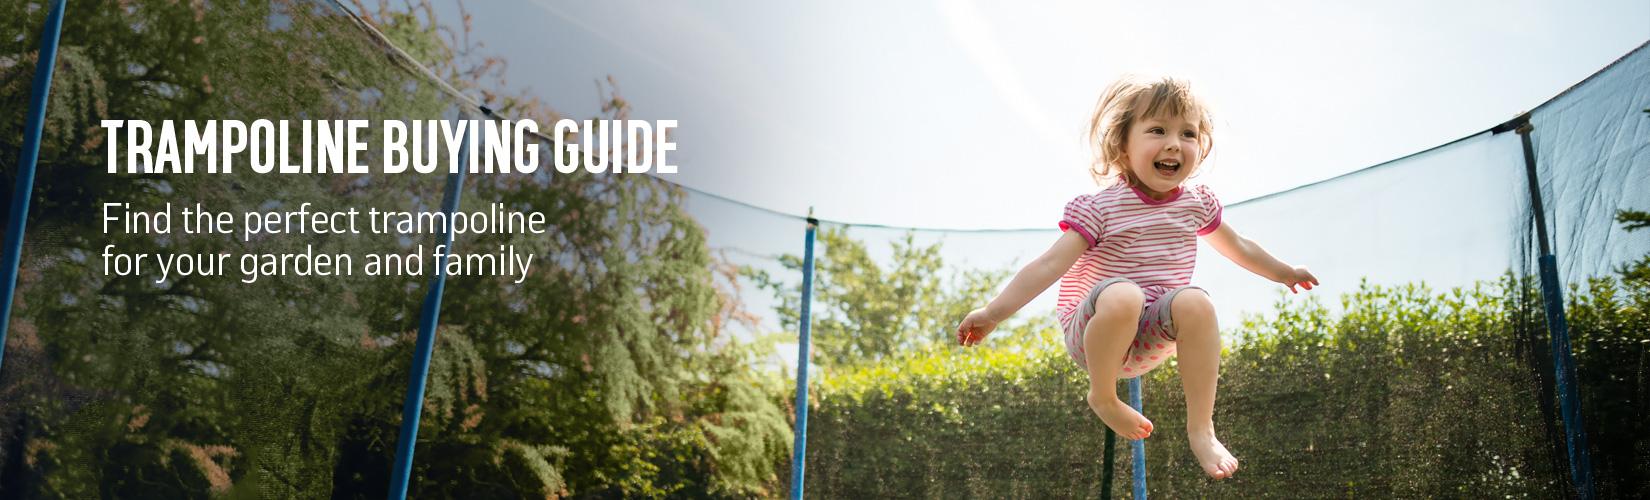 Trampoline buying guide. Find the perfect trampoline for your garden and family.